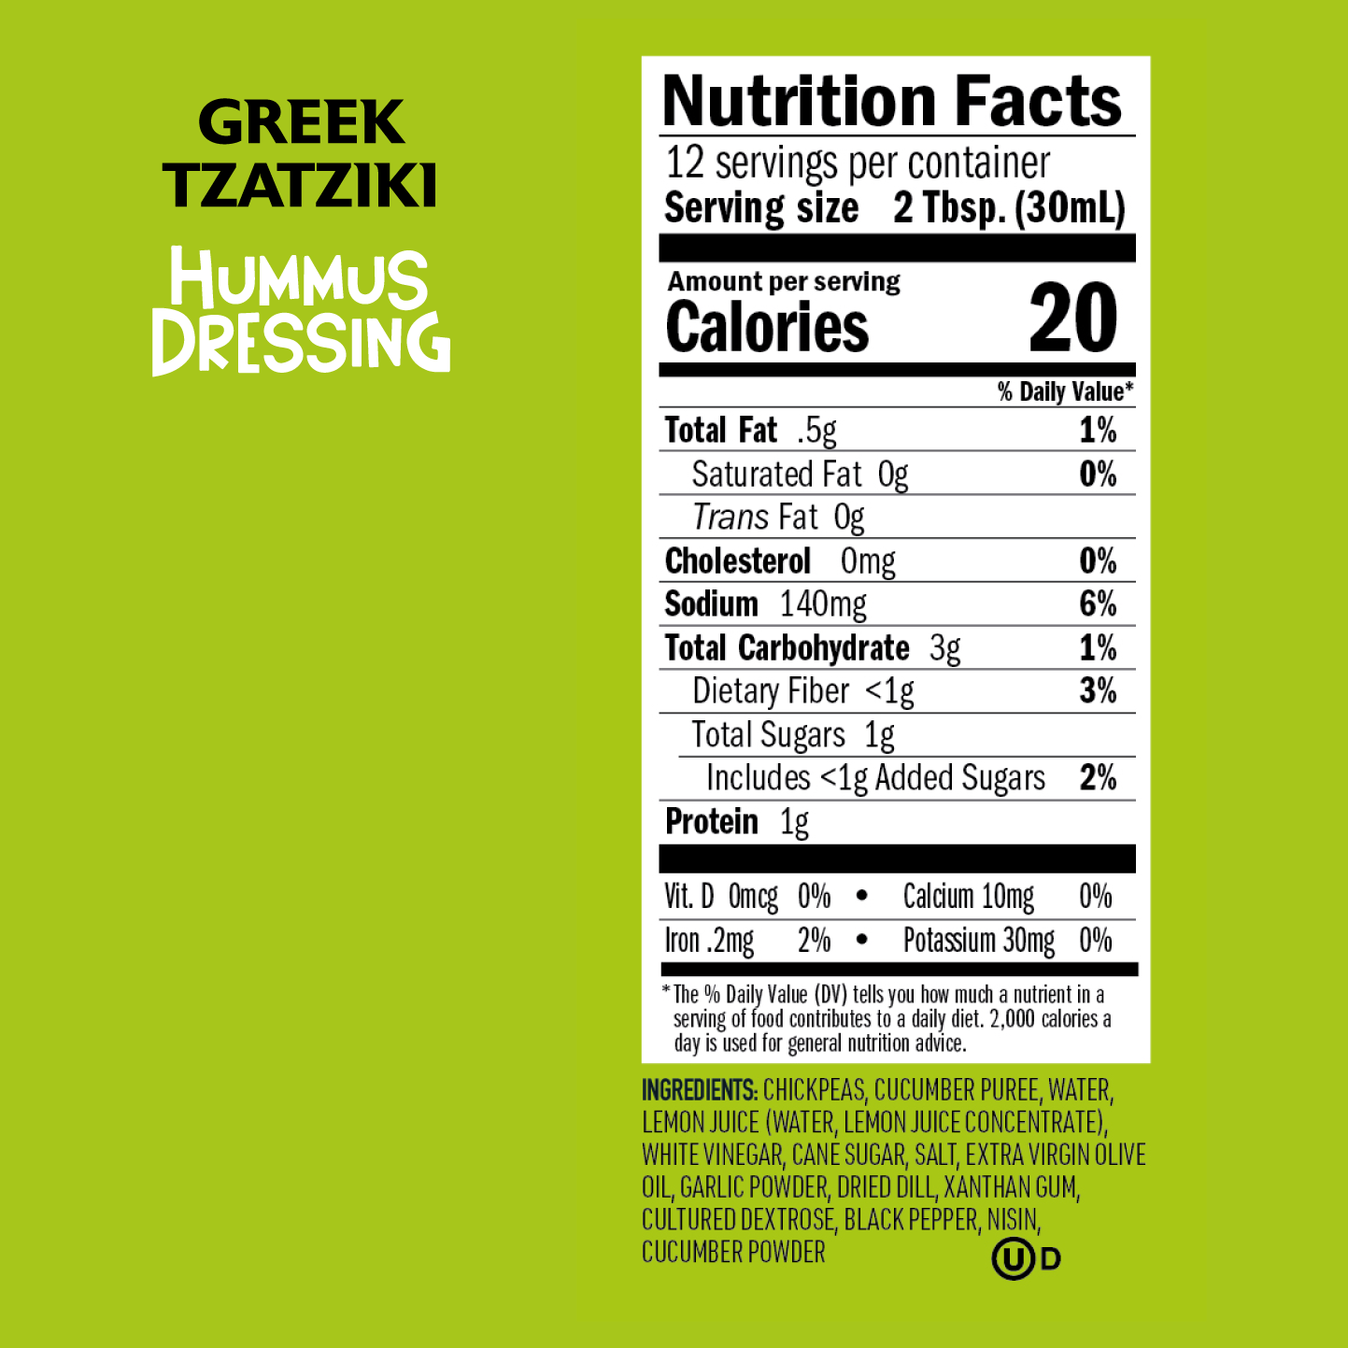 Nutrition facts for Greek Tzatziki flavored chickpea condiment. Low-calorie, clean-label, and vegan. 